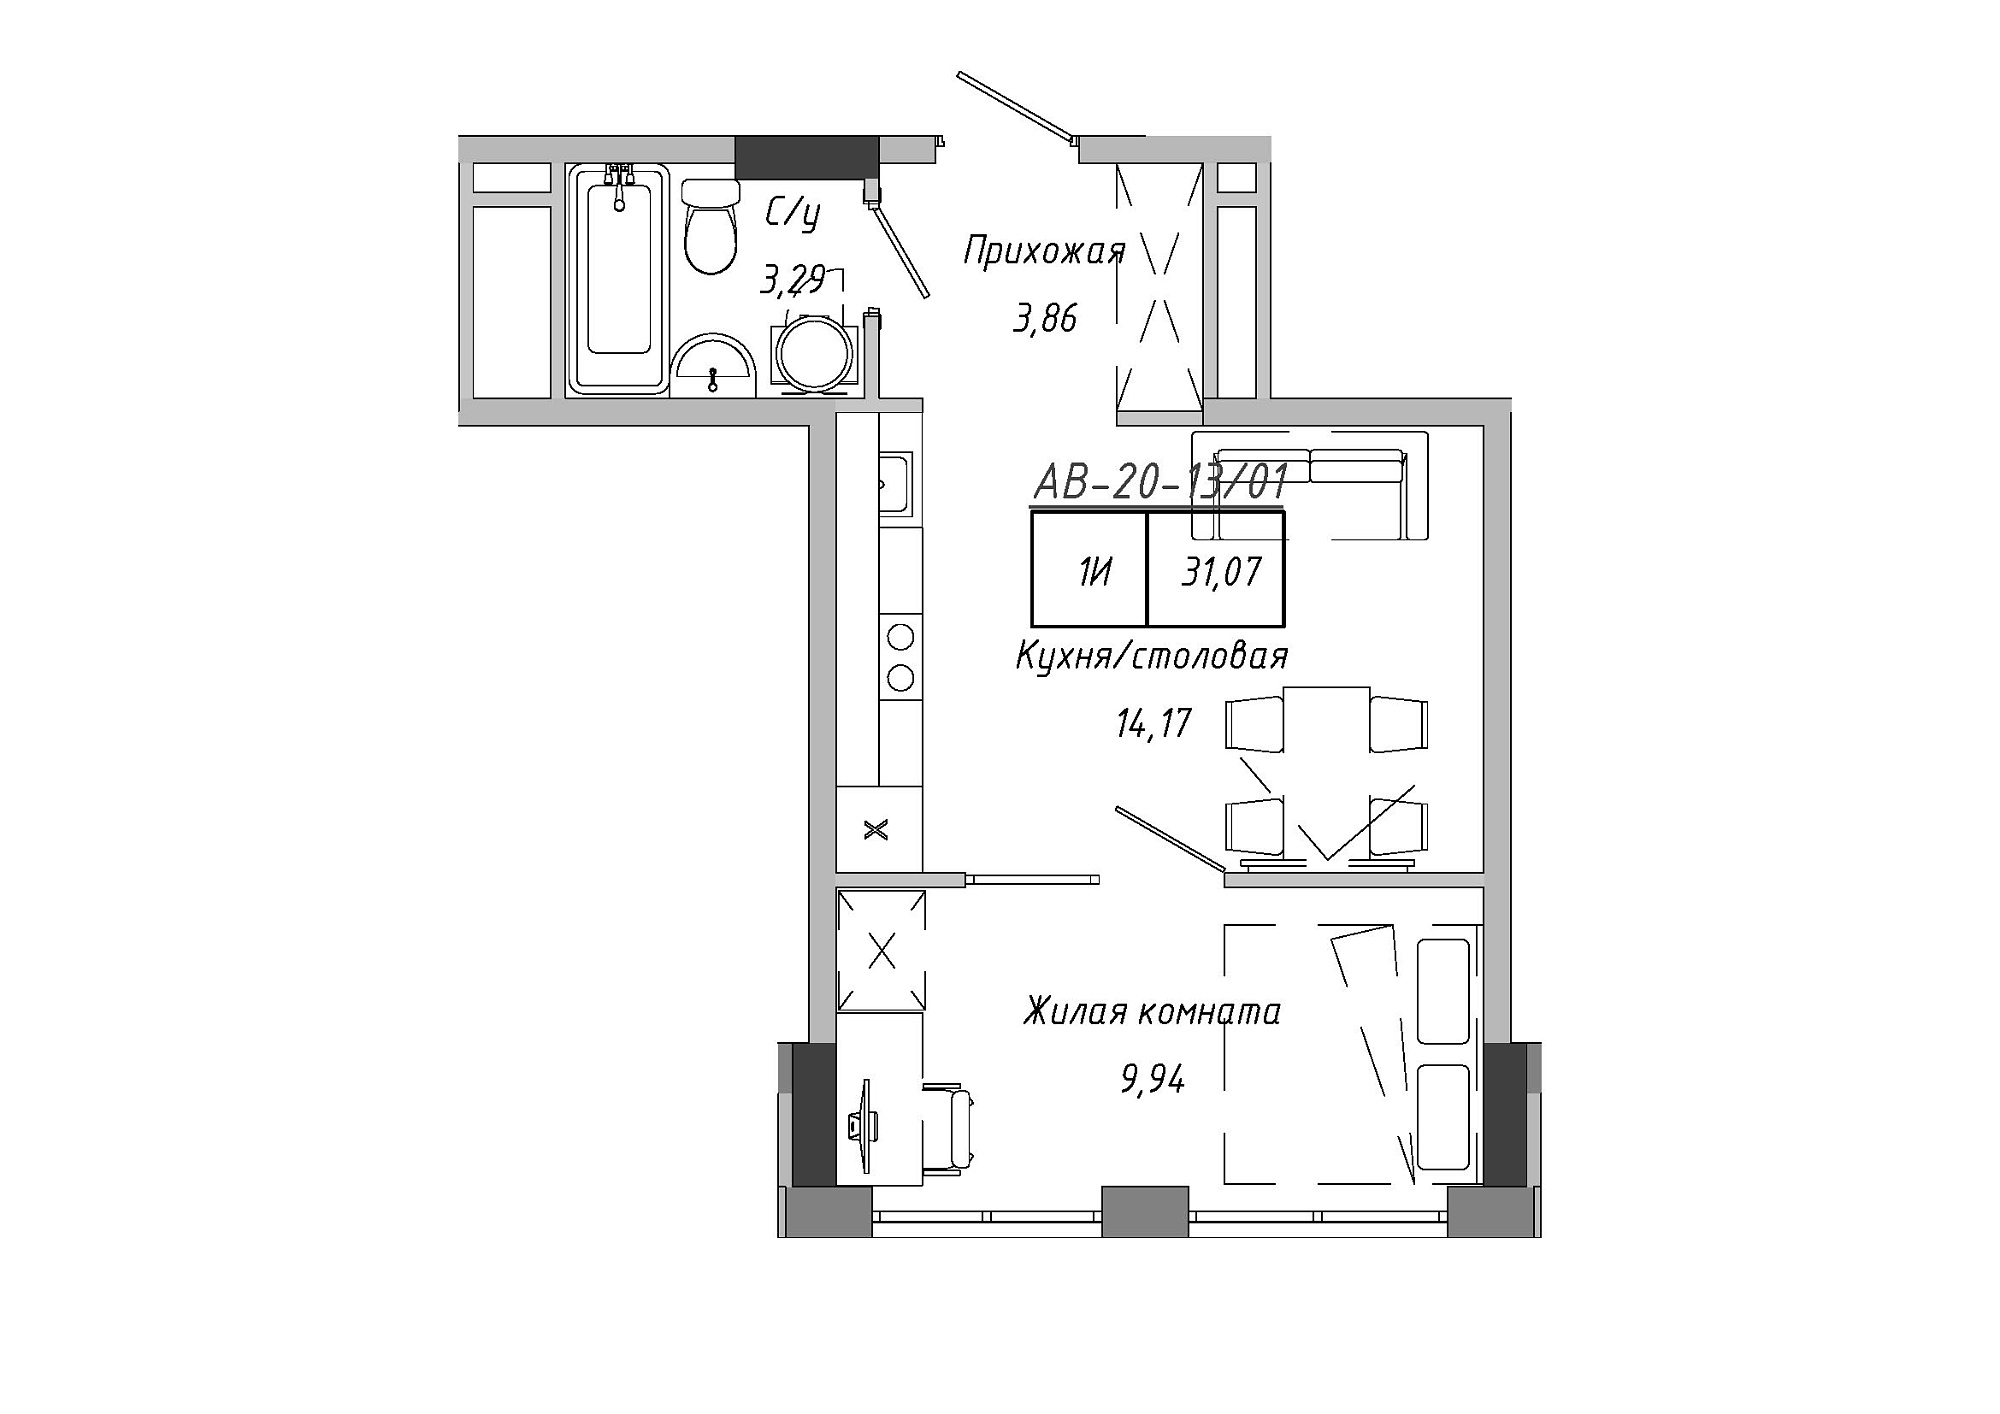 Planning 1-rm flats area 31.07m2, AB-20-13/00101.